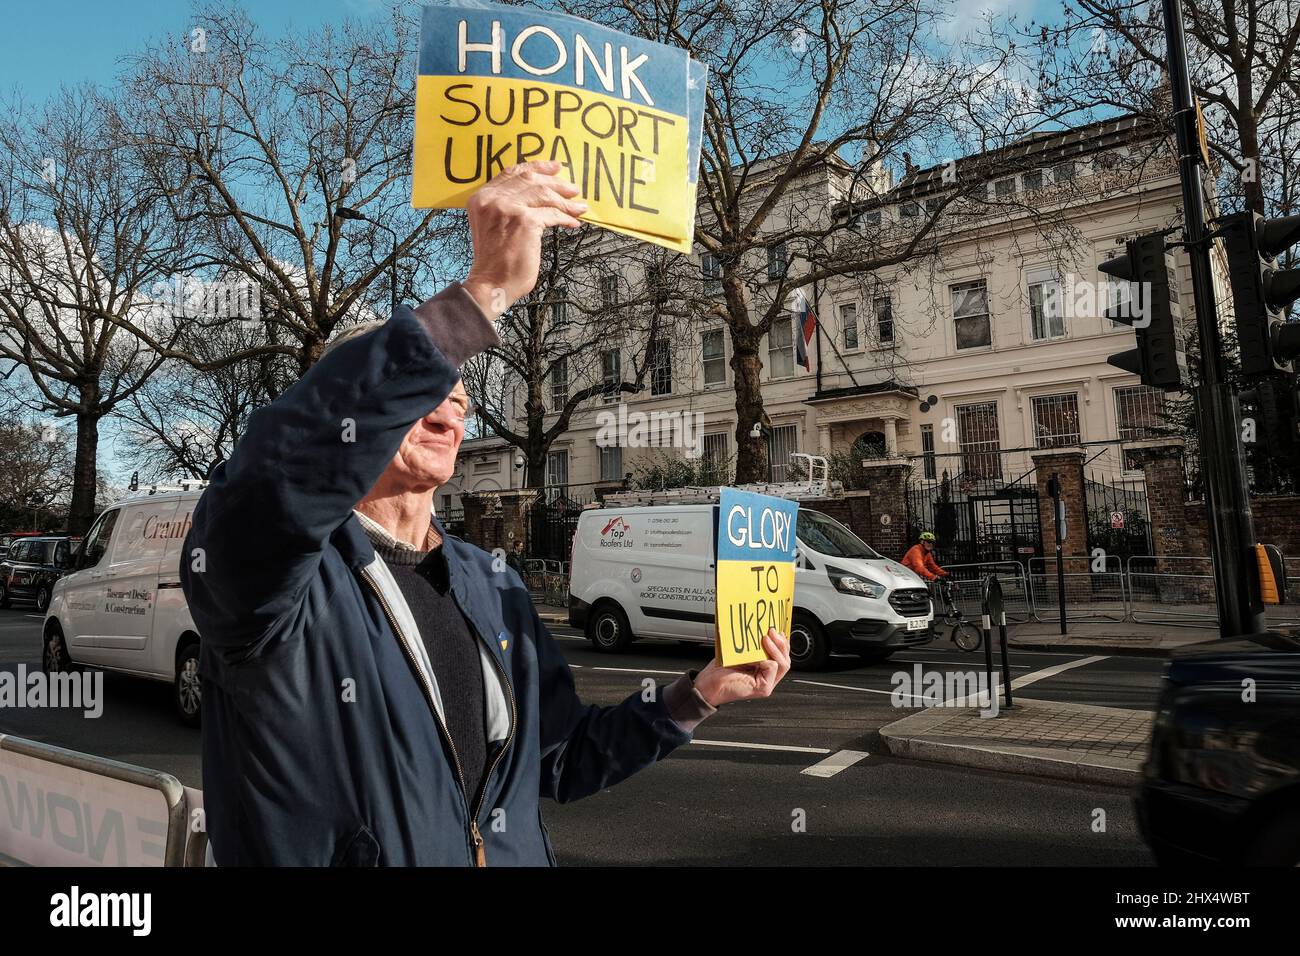 London UK, 9th March 2022. Pro-Ukraine supporters protest opposite the Russian Embassy encouraging drivers to sound their horns in support. Stock Photo